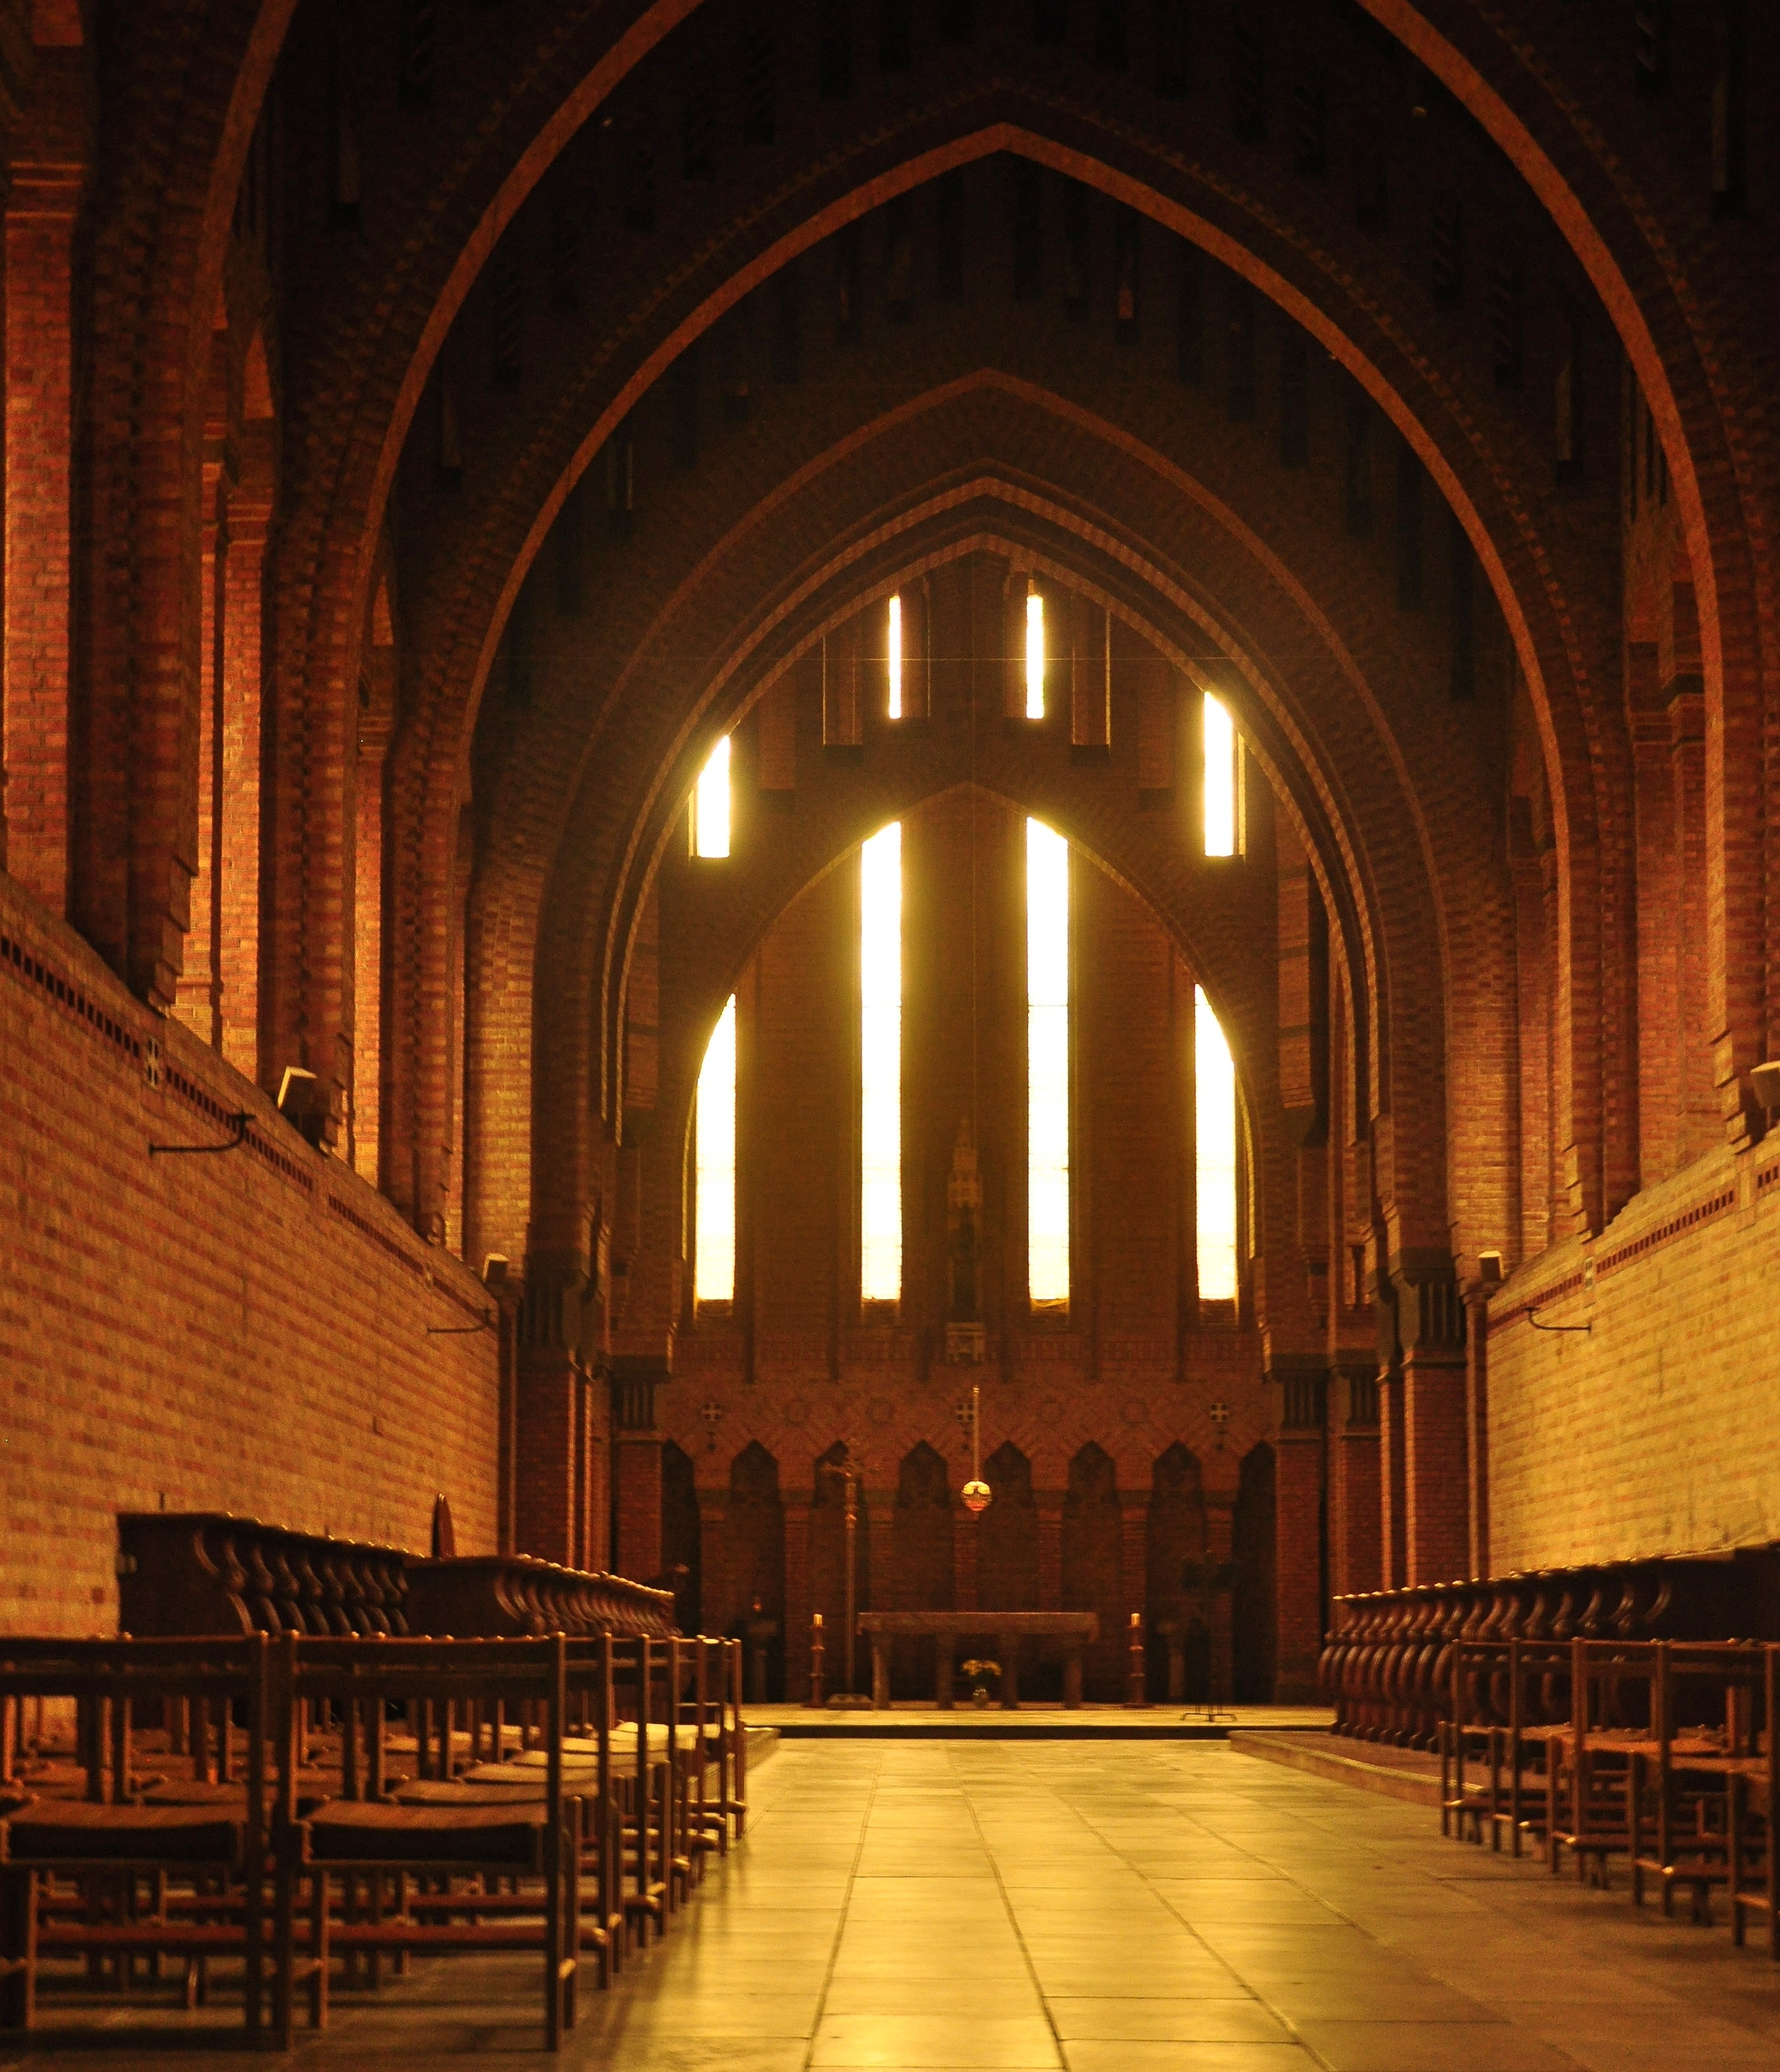 The interior of the abbey church at Quarr Abbey on the Isle of Wight.